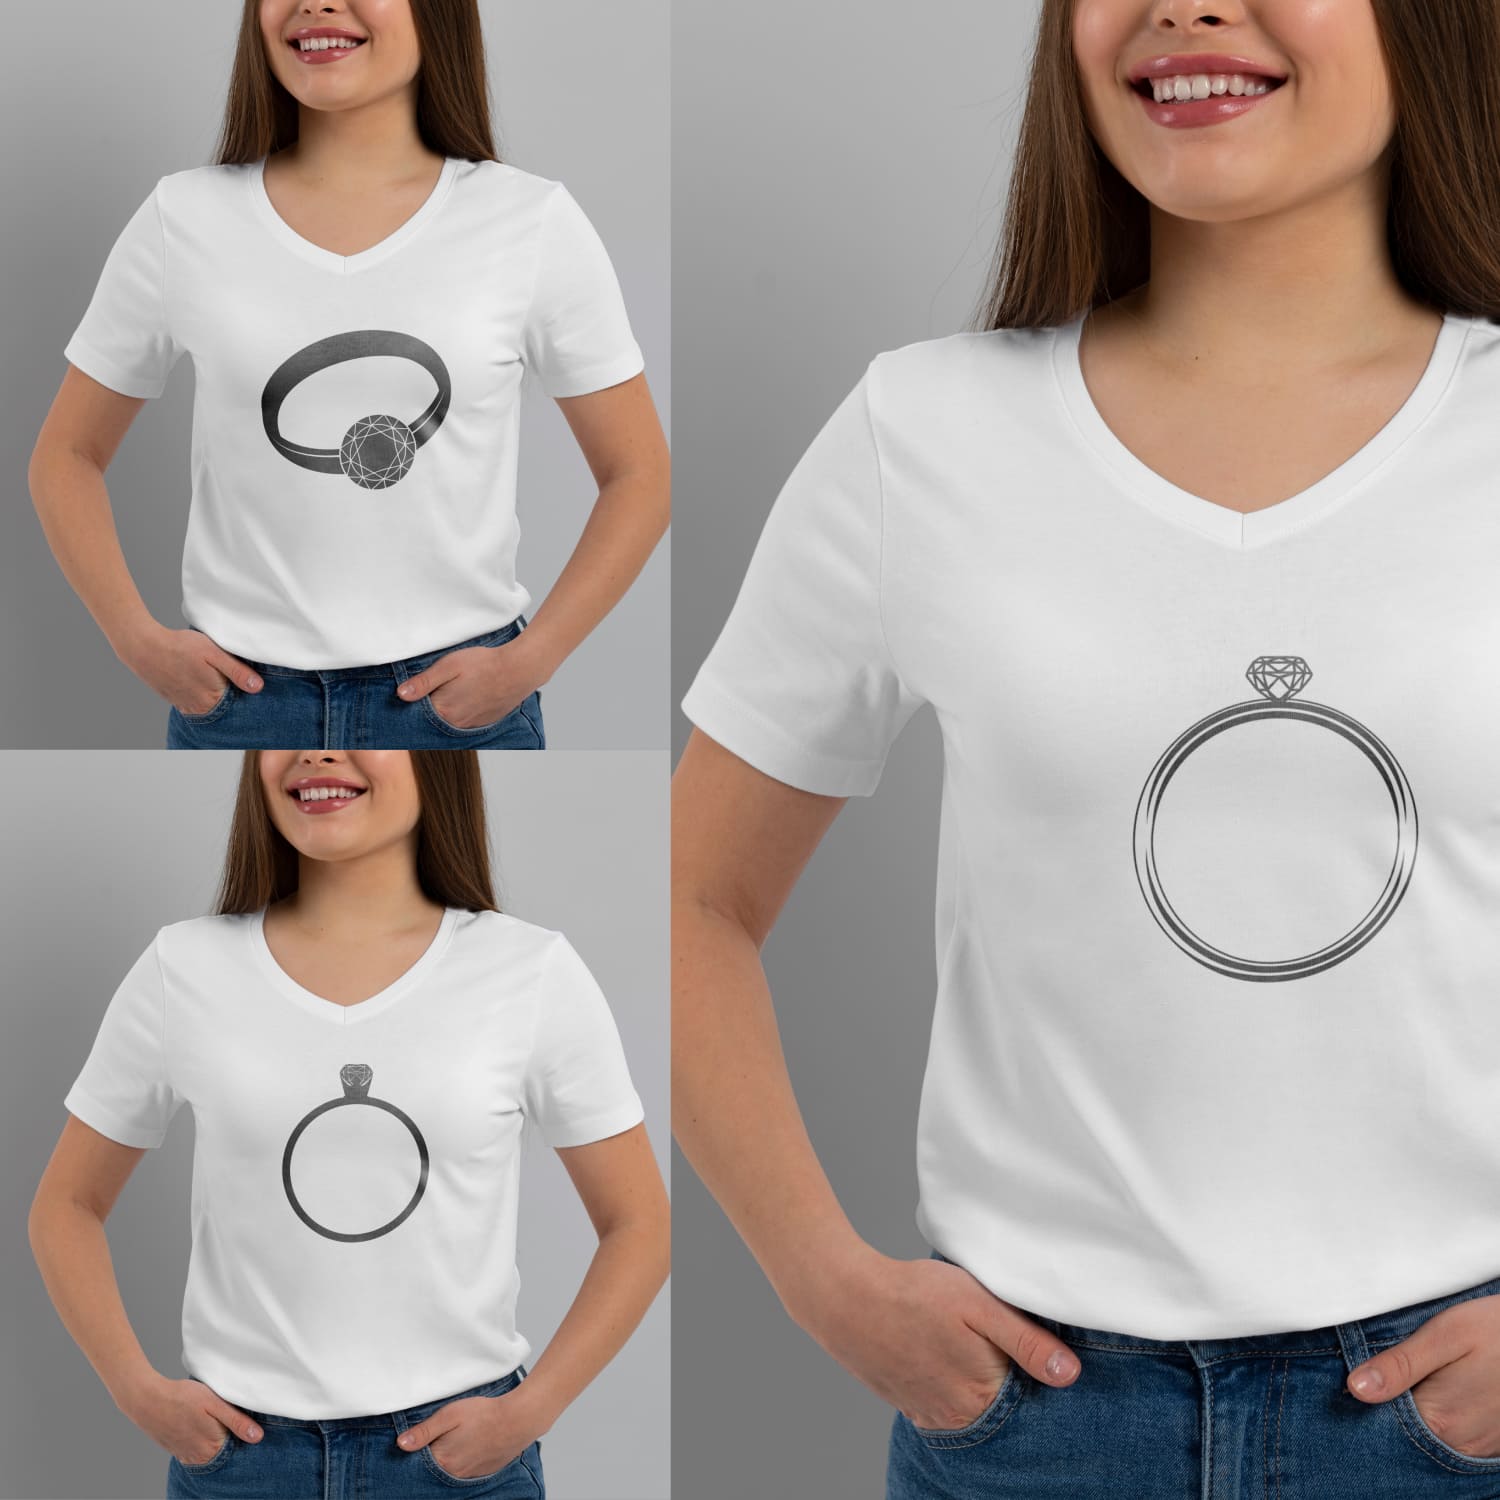 Set of T-shirt images with irresistible prints of a diamond ring.